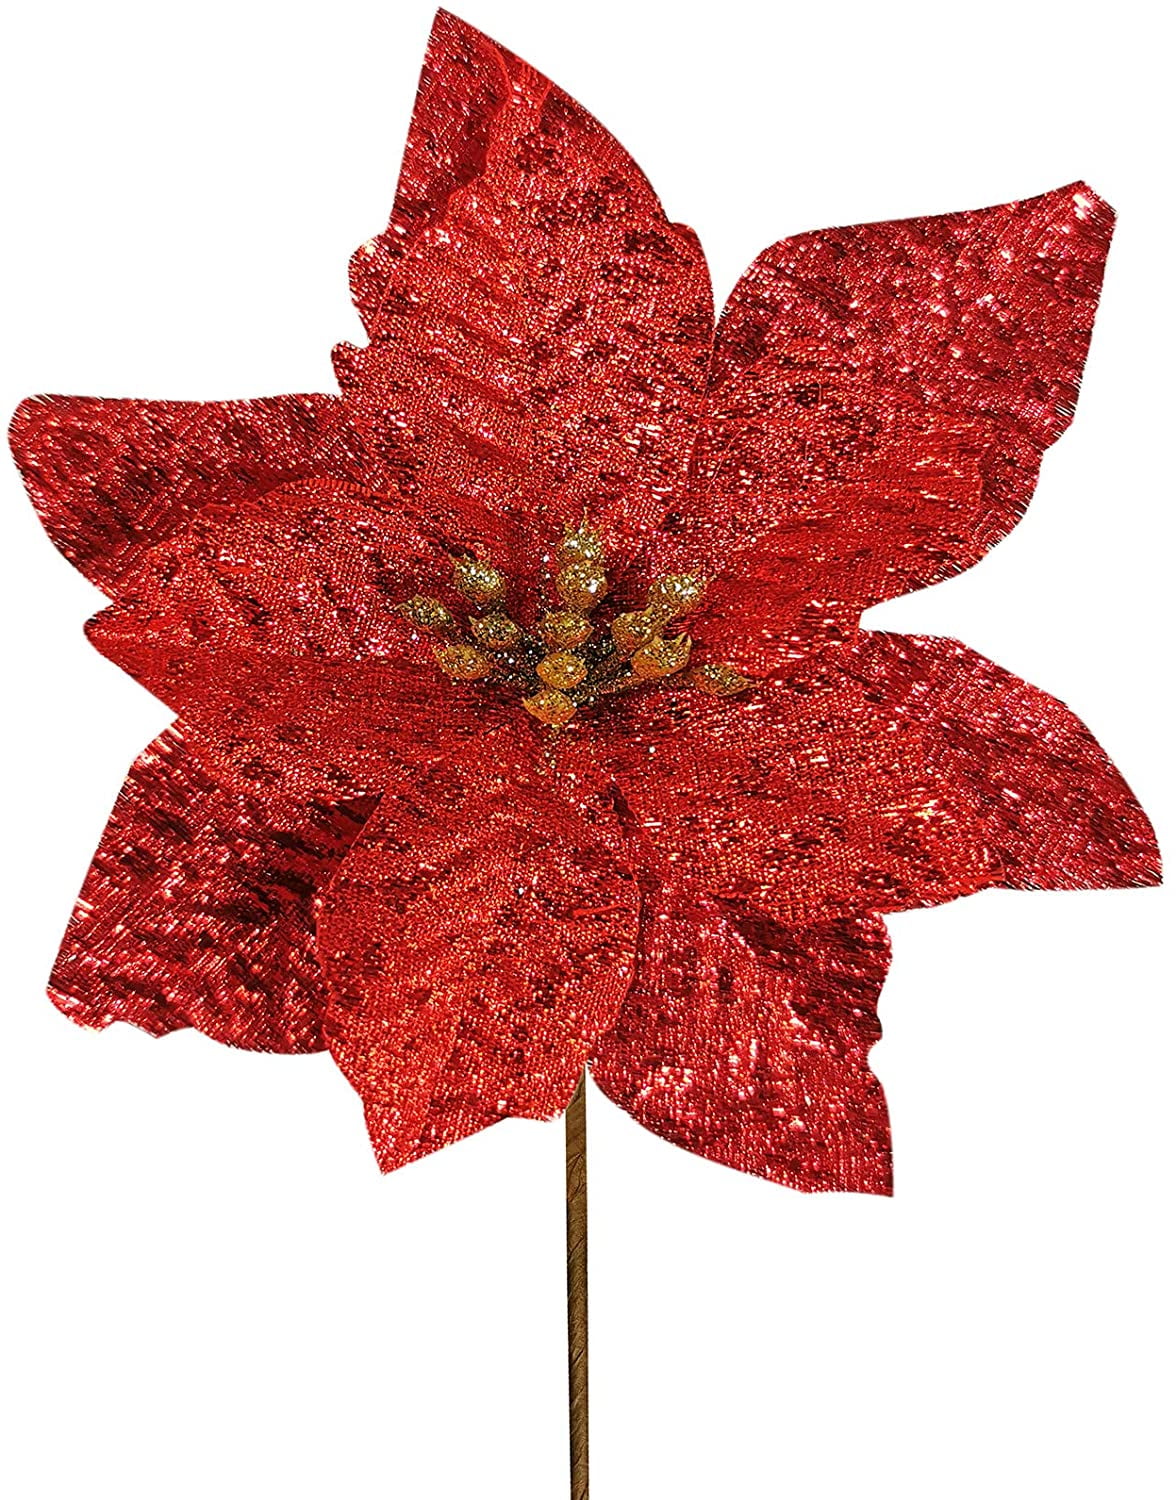 5" WIRED LARGE RED POINSETTIA GLITTER FLOWER BAUBLE CLIP-ON CHRISTMAS DECORATION 